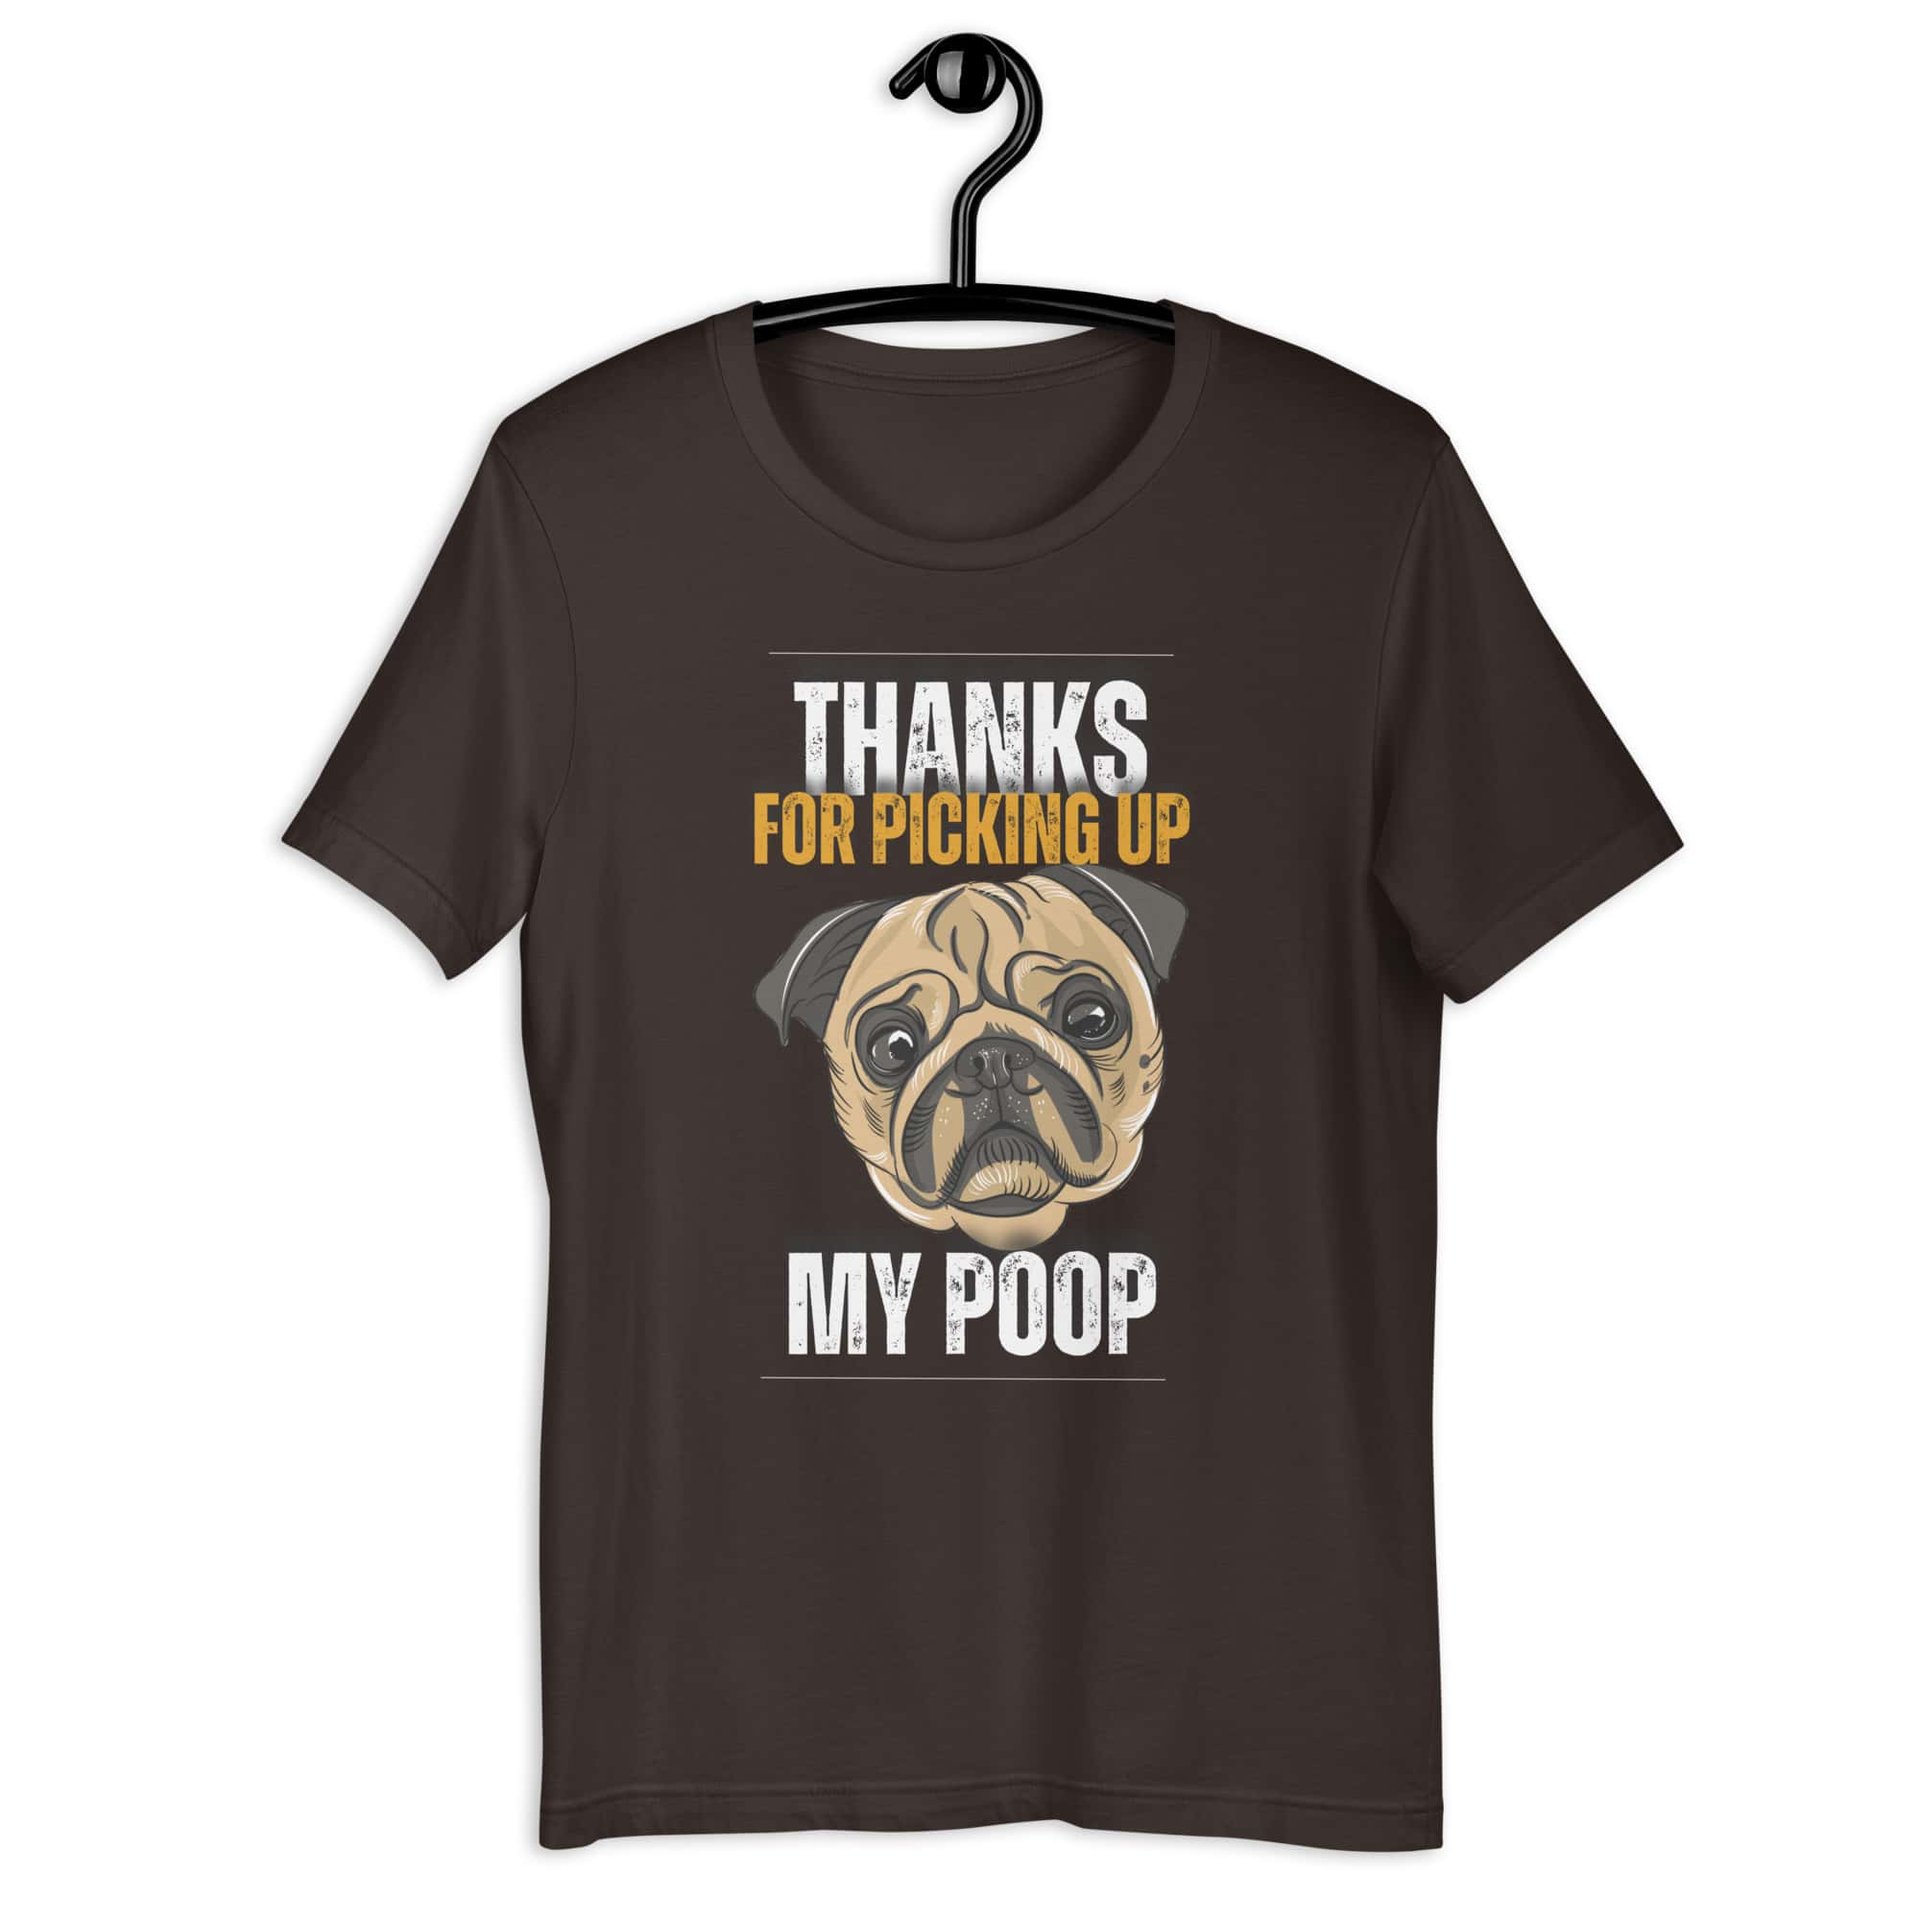 Thanks For Picking Up My POOP Funny Bulldog Unisex T-Shir. Brown